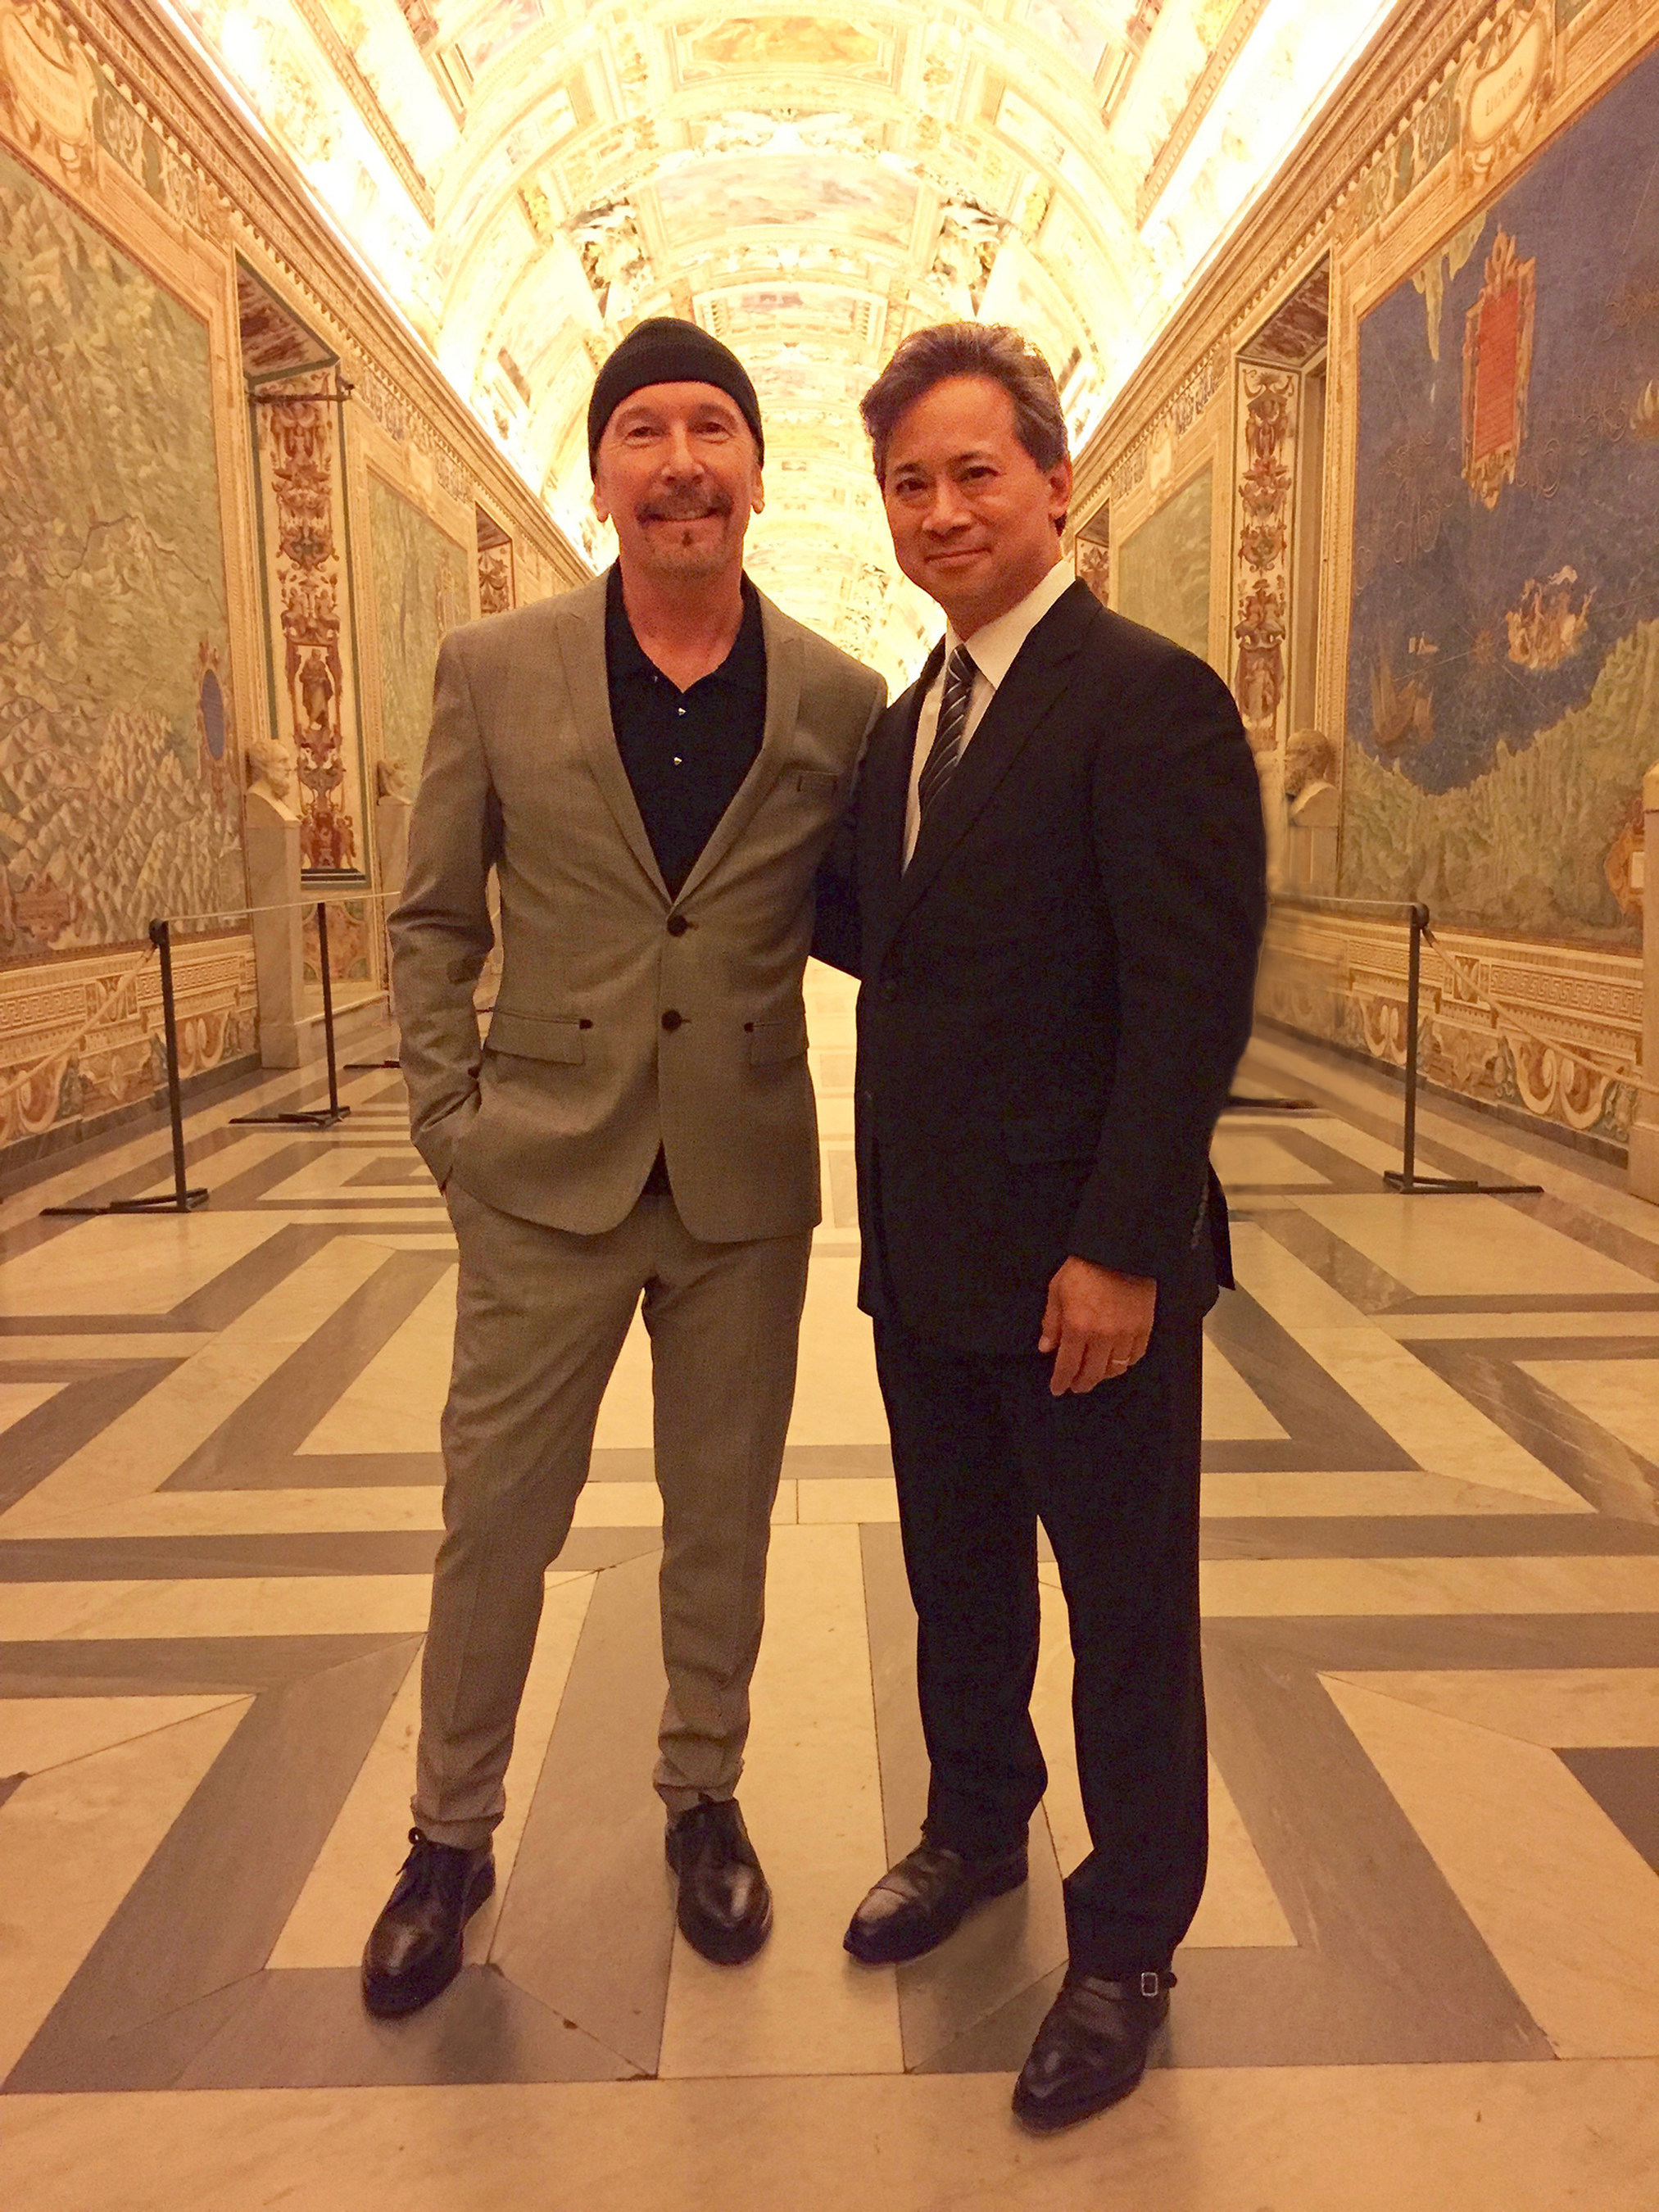 The Edge of U2 and Dr. William Li at the Vatican.